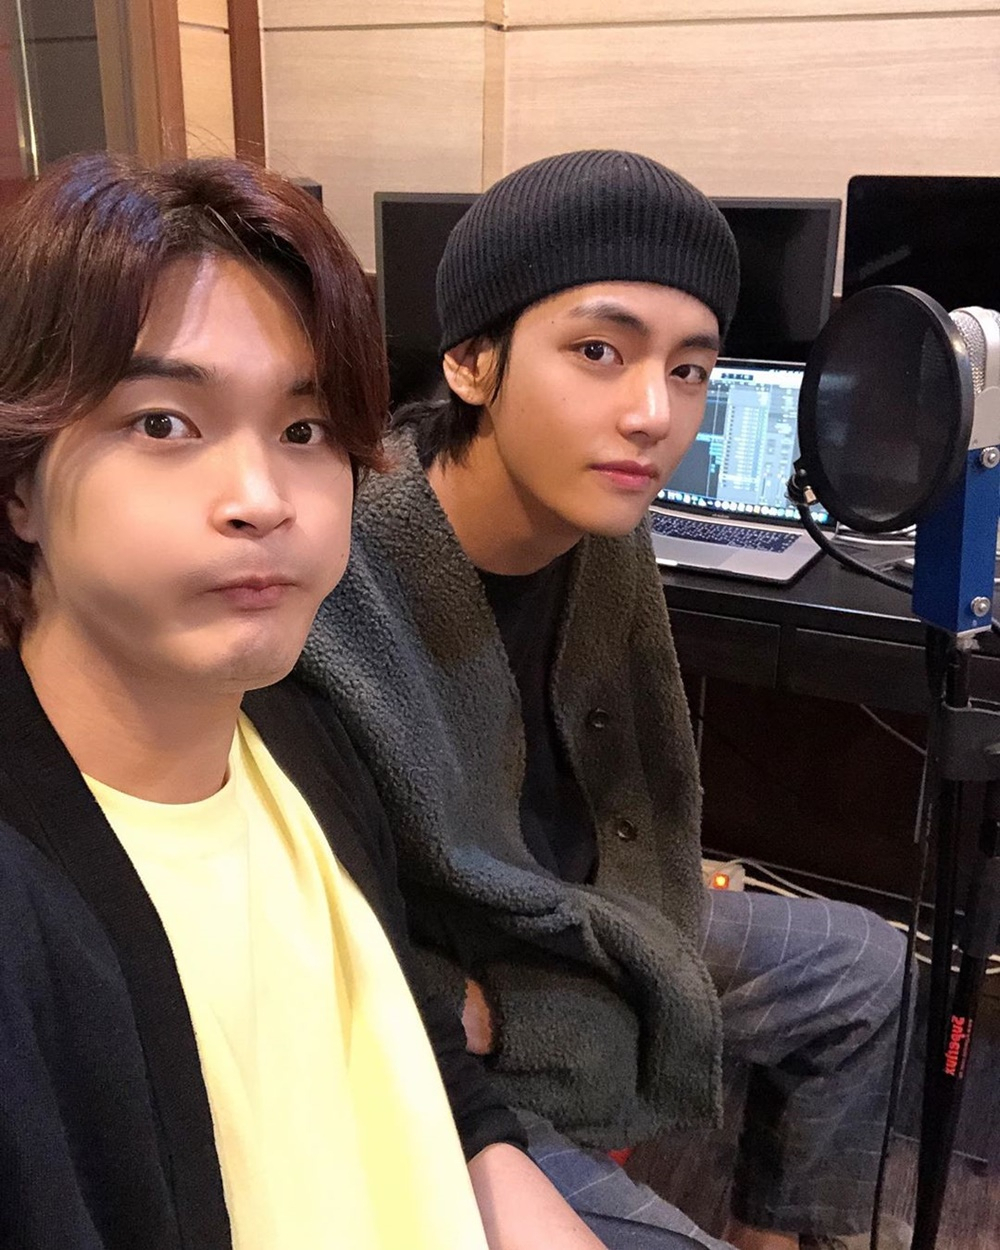 Musician Nive (NIve), who produced Paul Kim, EXO, and Hye-won Park (HYNN), shared BTS (BST) V and Bangkok Challenge V.According to Nibs agency 153 Entertainment, Nib recently joined BTS V and the Bangkok Challenge, and started an impromptu composition battle.The video of the two people working together is uploaded to the official BTS SNS and is receiving the attention of Amy around the world.According to an agency official, the meeting between Nib and V was made by Nibs best friend Paul Kim.V, who usually listened to Nibs music, asked Paul Kim to meet and naturally became acquainted.Since then, V and Nib have had a meaningful time playing an impromptu compositional confrontation, and they have been called Vs composition partner between Amy.Nib first met with the public with Brian Park in the top 9 of Superstar K6 broadcast in 2014.Since then, he has continued his steady musical activities under the real name of Park Ji-soo. He has also been working on EXO Chen Solo deV album title song We break up after April, EXO Dance, Like Rain Day by Jeong Se-un, Paul Kim New Day, Why My Spring, SAM KIM Wheres My Money, HYN He produced a number of songs from various genres, including the title songs of the N (Hye-won Park) mini album, No matter what, Goodbye and To Today (TO.DAY).Earlier this month, it gained popularity by announcing the domestic deV single Like a Fool, which was collaborated with SAM KIM.